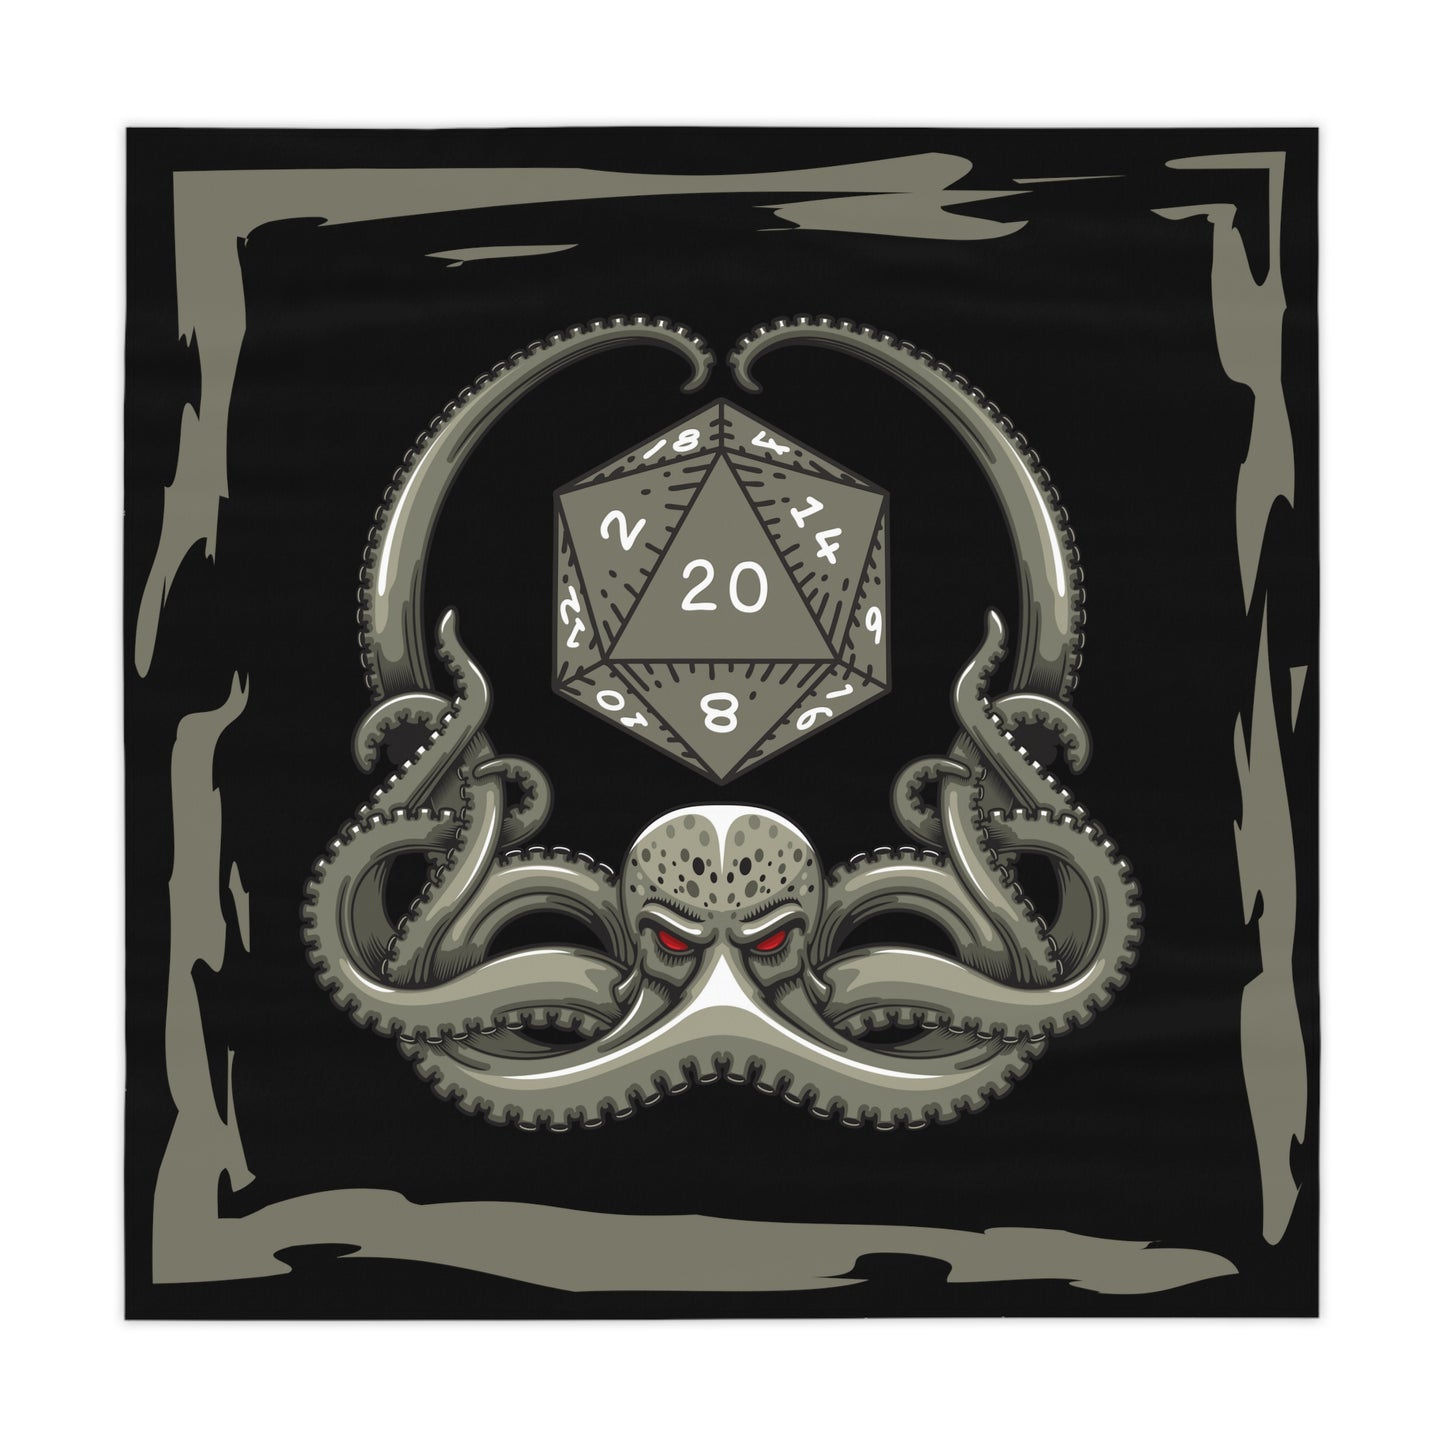 Cthulhu D20 TTRPG Gaming Table Cover